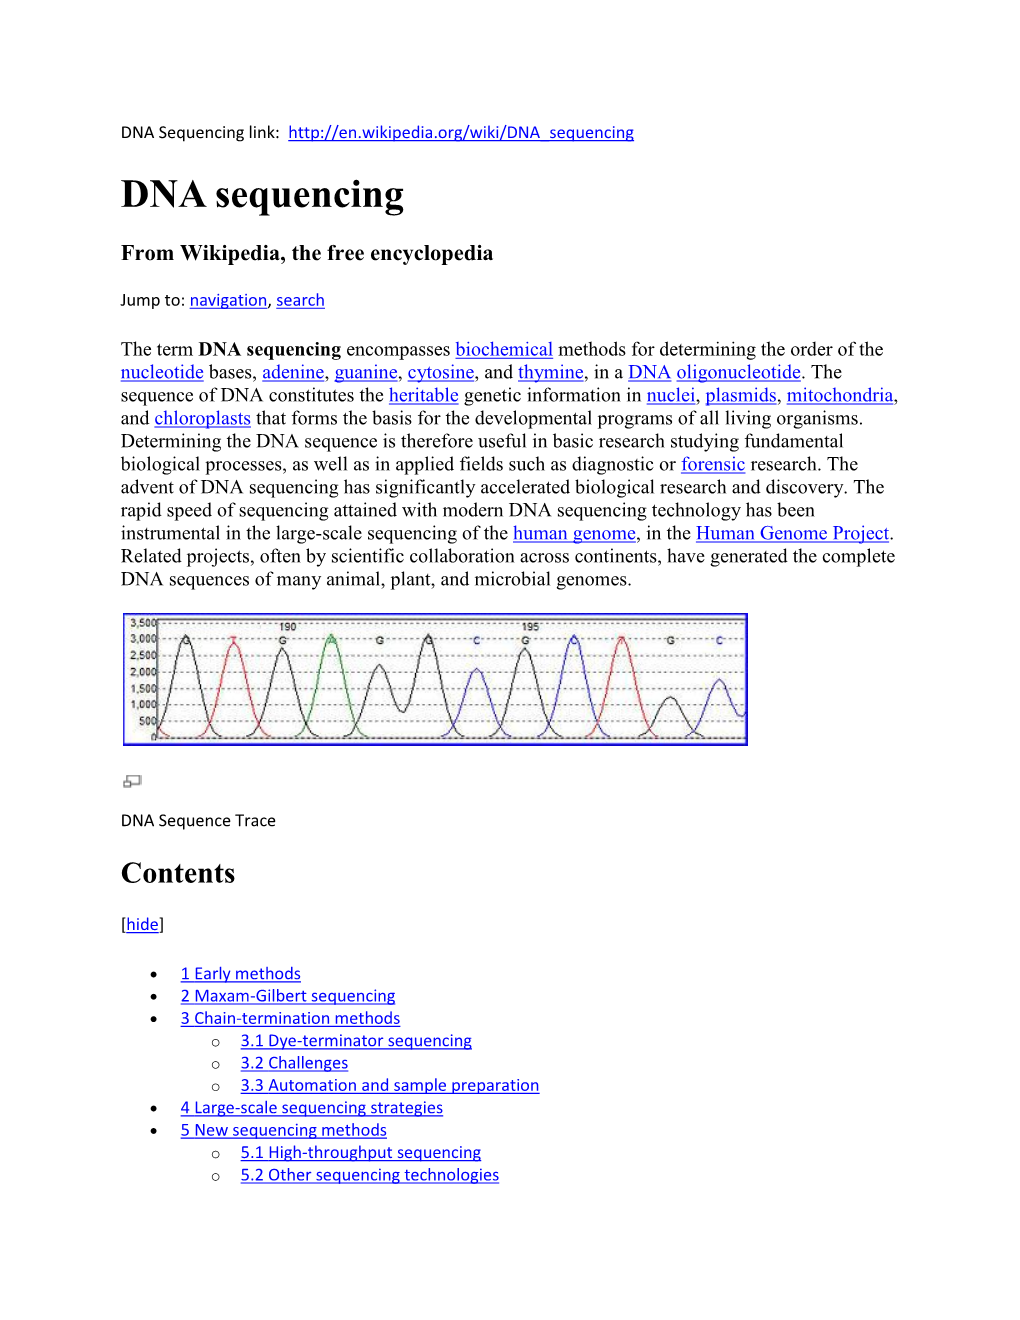 DNA Sequencing Link: DNA Sequencing